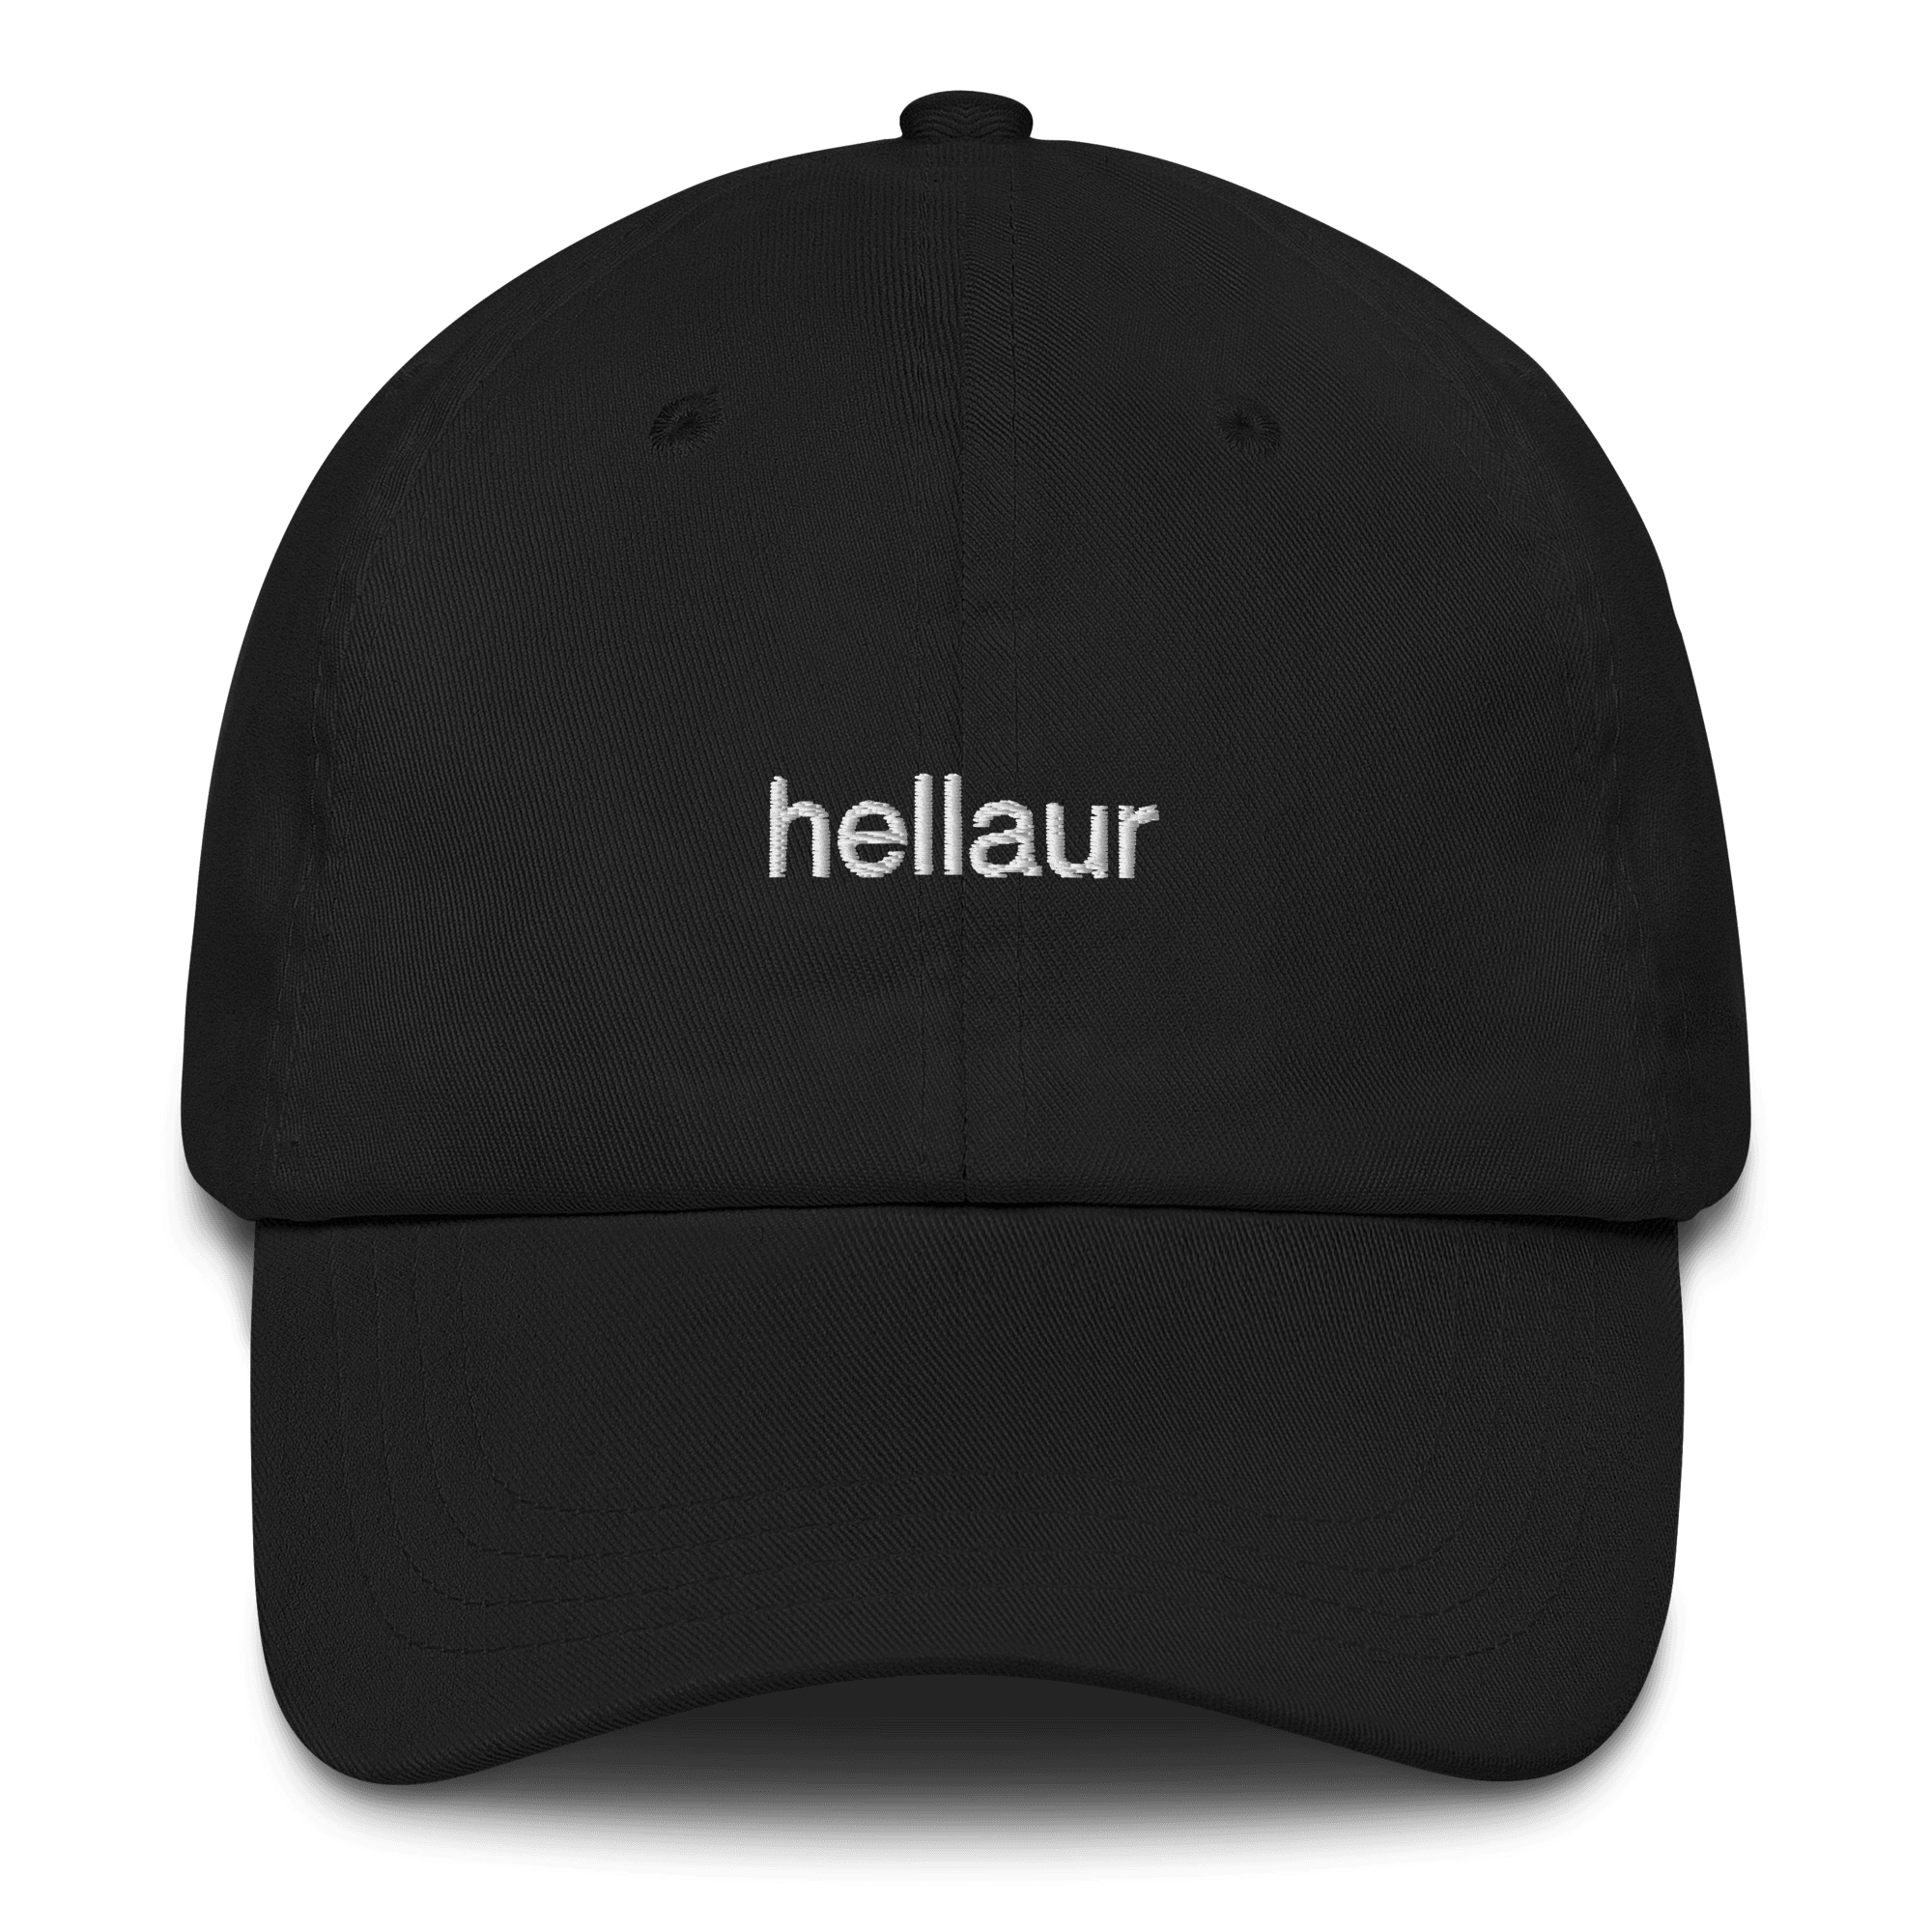 hellaur Embroidered Hat - Polychrome Goods 🍊